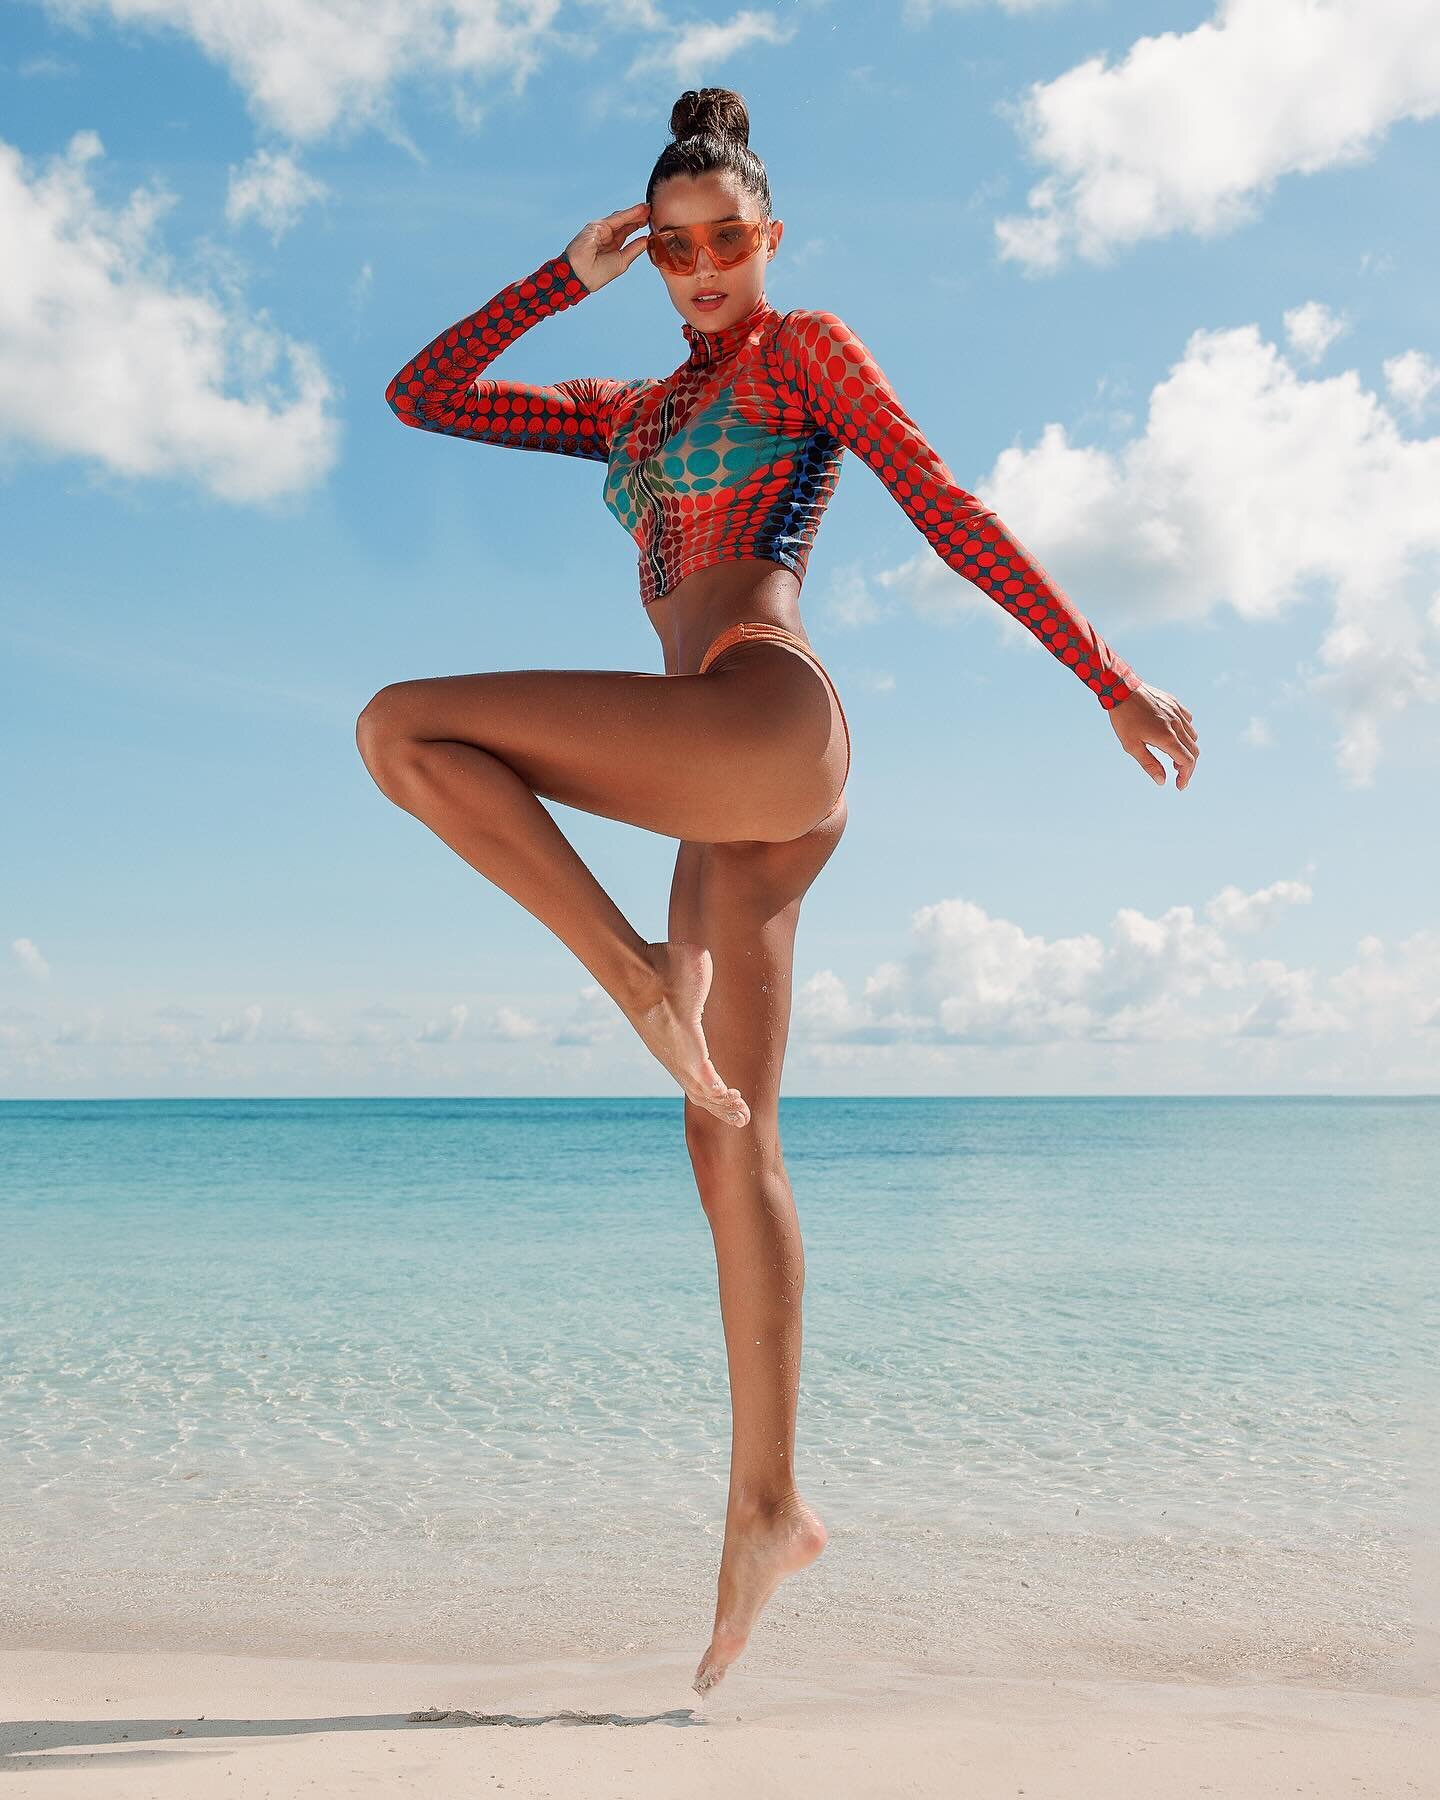 Leaping into 2024, thank you @fortlauderdalemagazine 🩵📸

&ldquo;Sculpting Style&rdquo; A Fitness, Fashion &amp; Travel editorial produced here in The Bahamas With this amazing team! 💕

Photography &amp; Production: Robyn Damianos @robyndamianospho